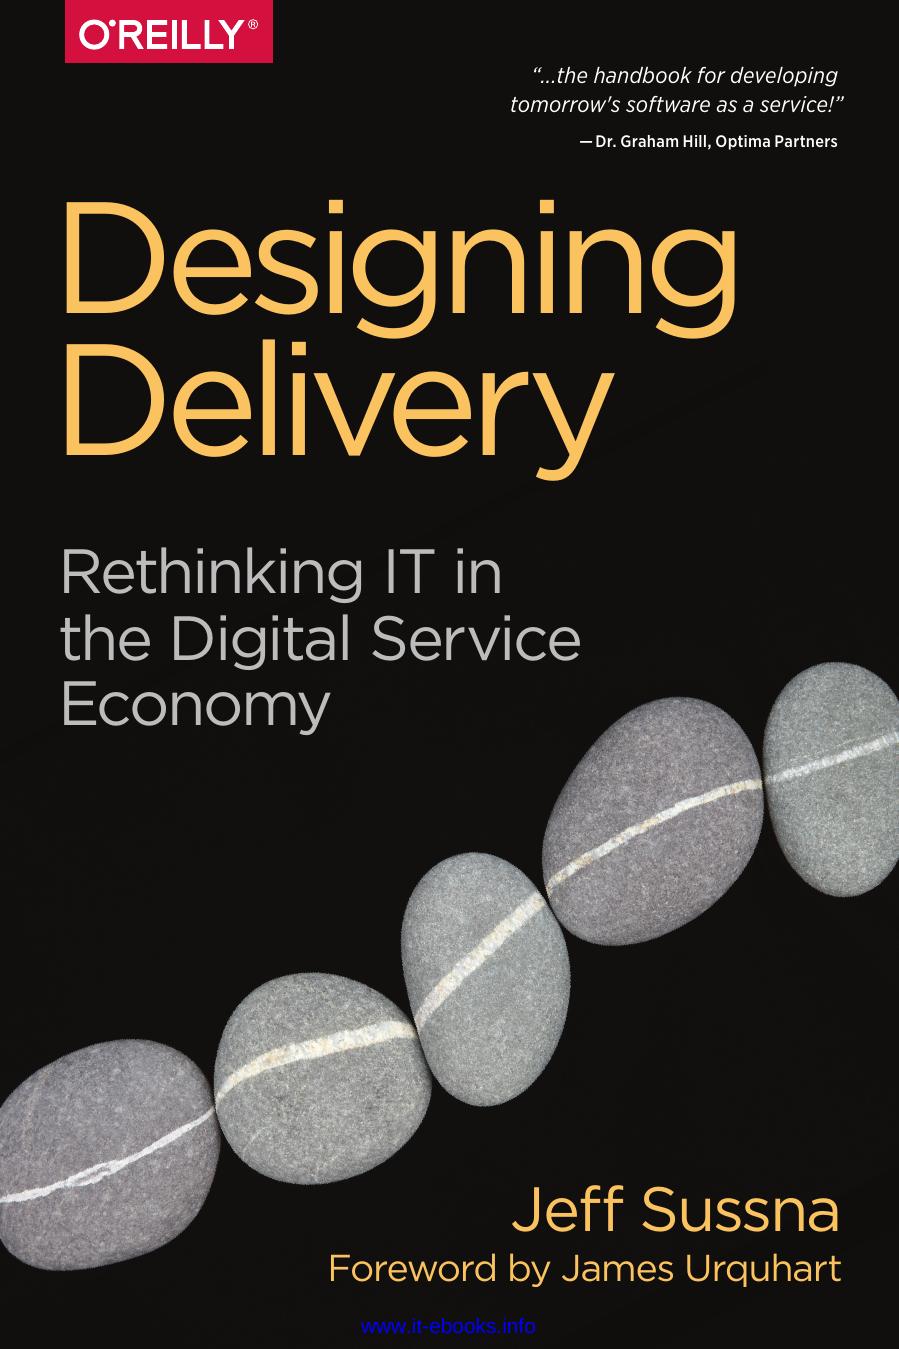 Designing Delivery